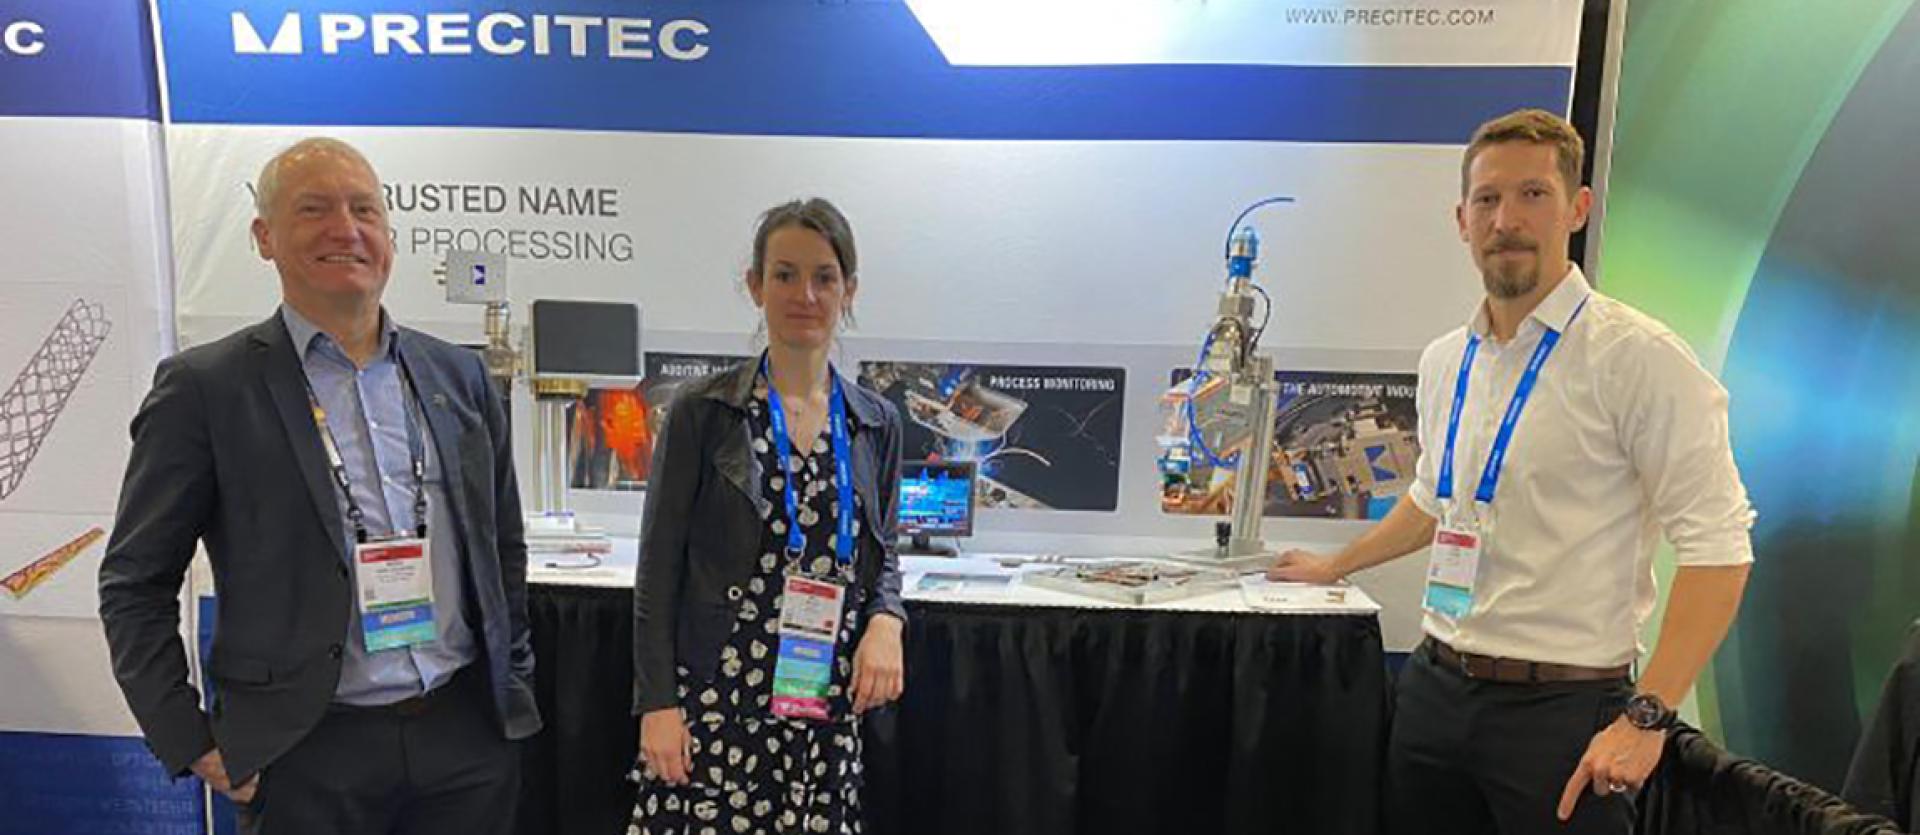 Gwenn, our product line manager standing in front of Precitec's booth